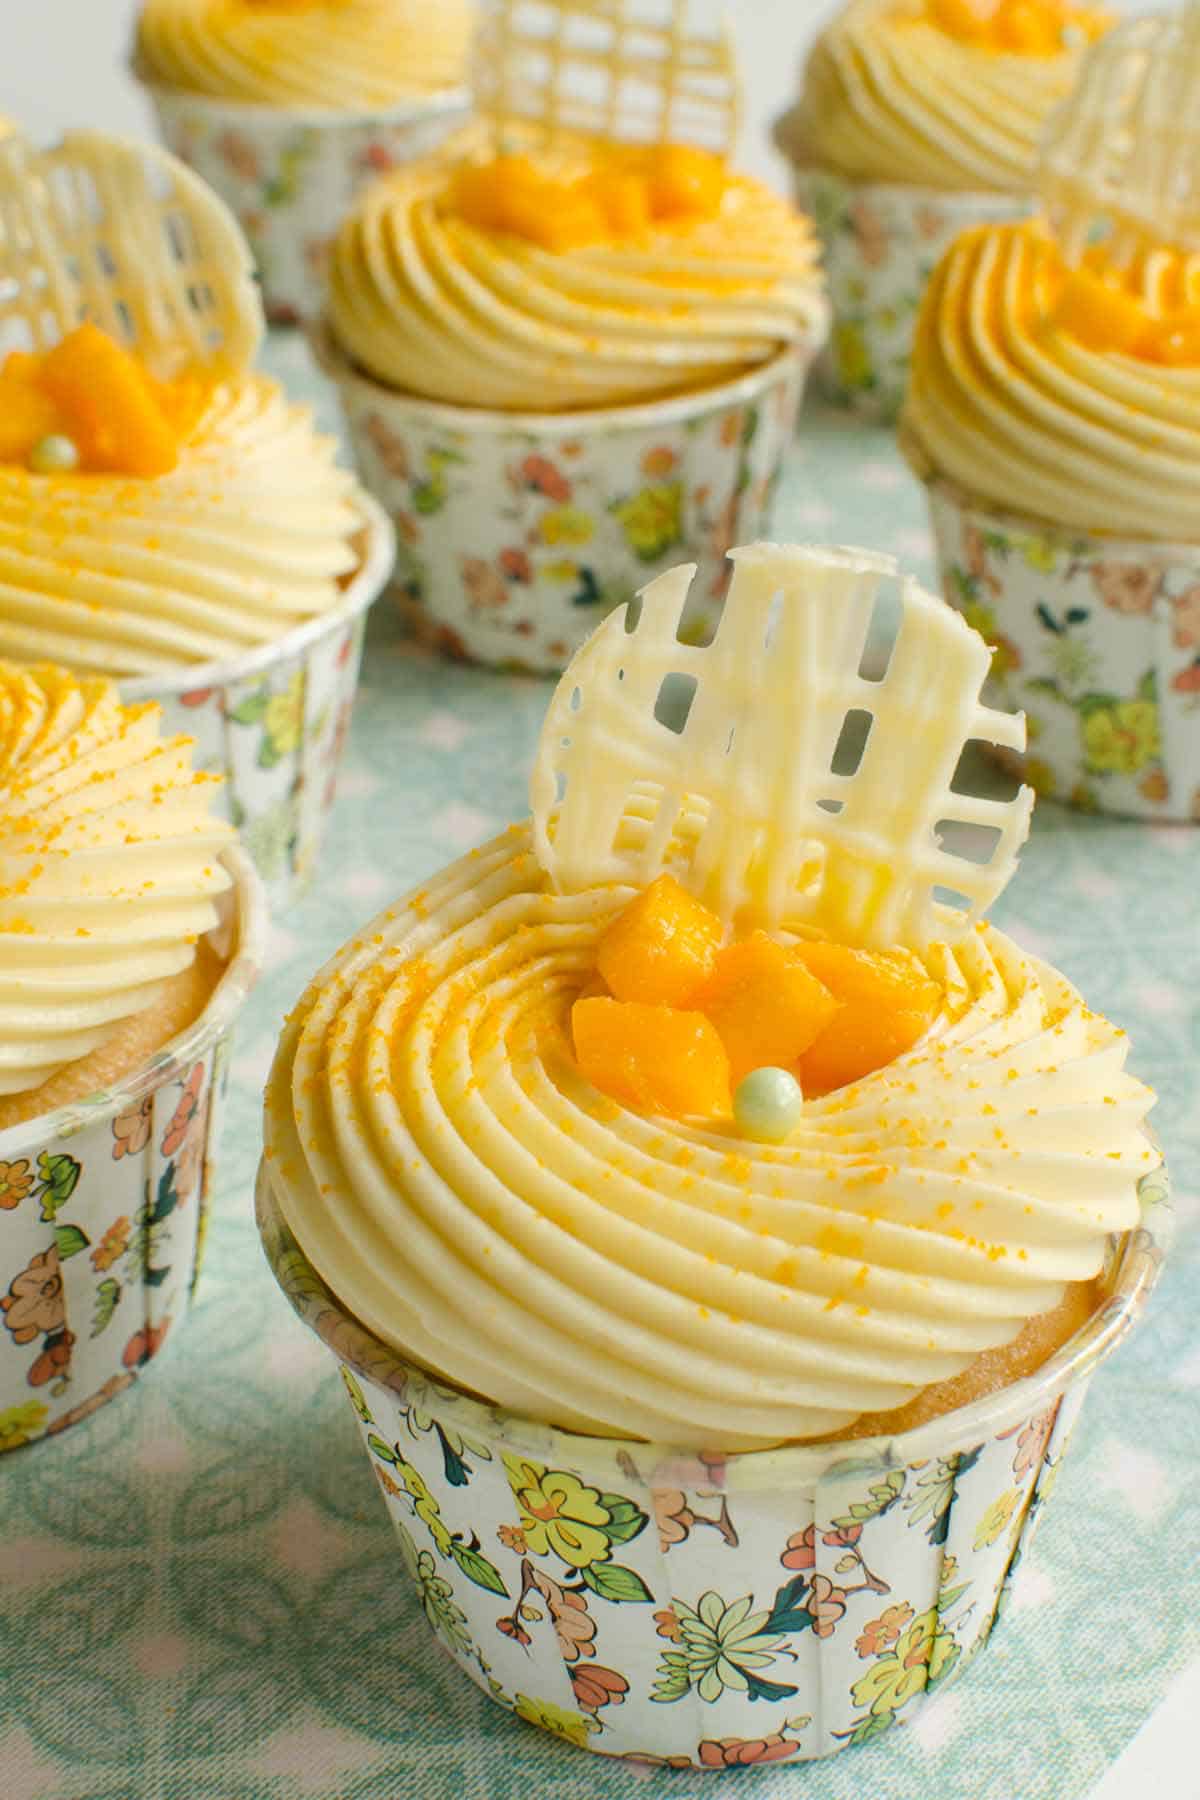 Lemon cupcakes filled with mango mousse and topped with vanilla buttercream and mango chunks.